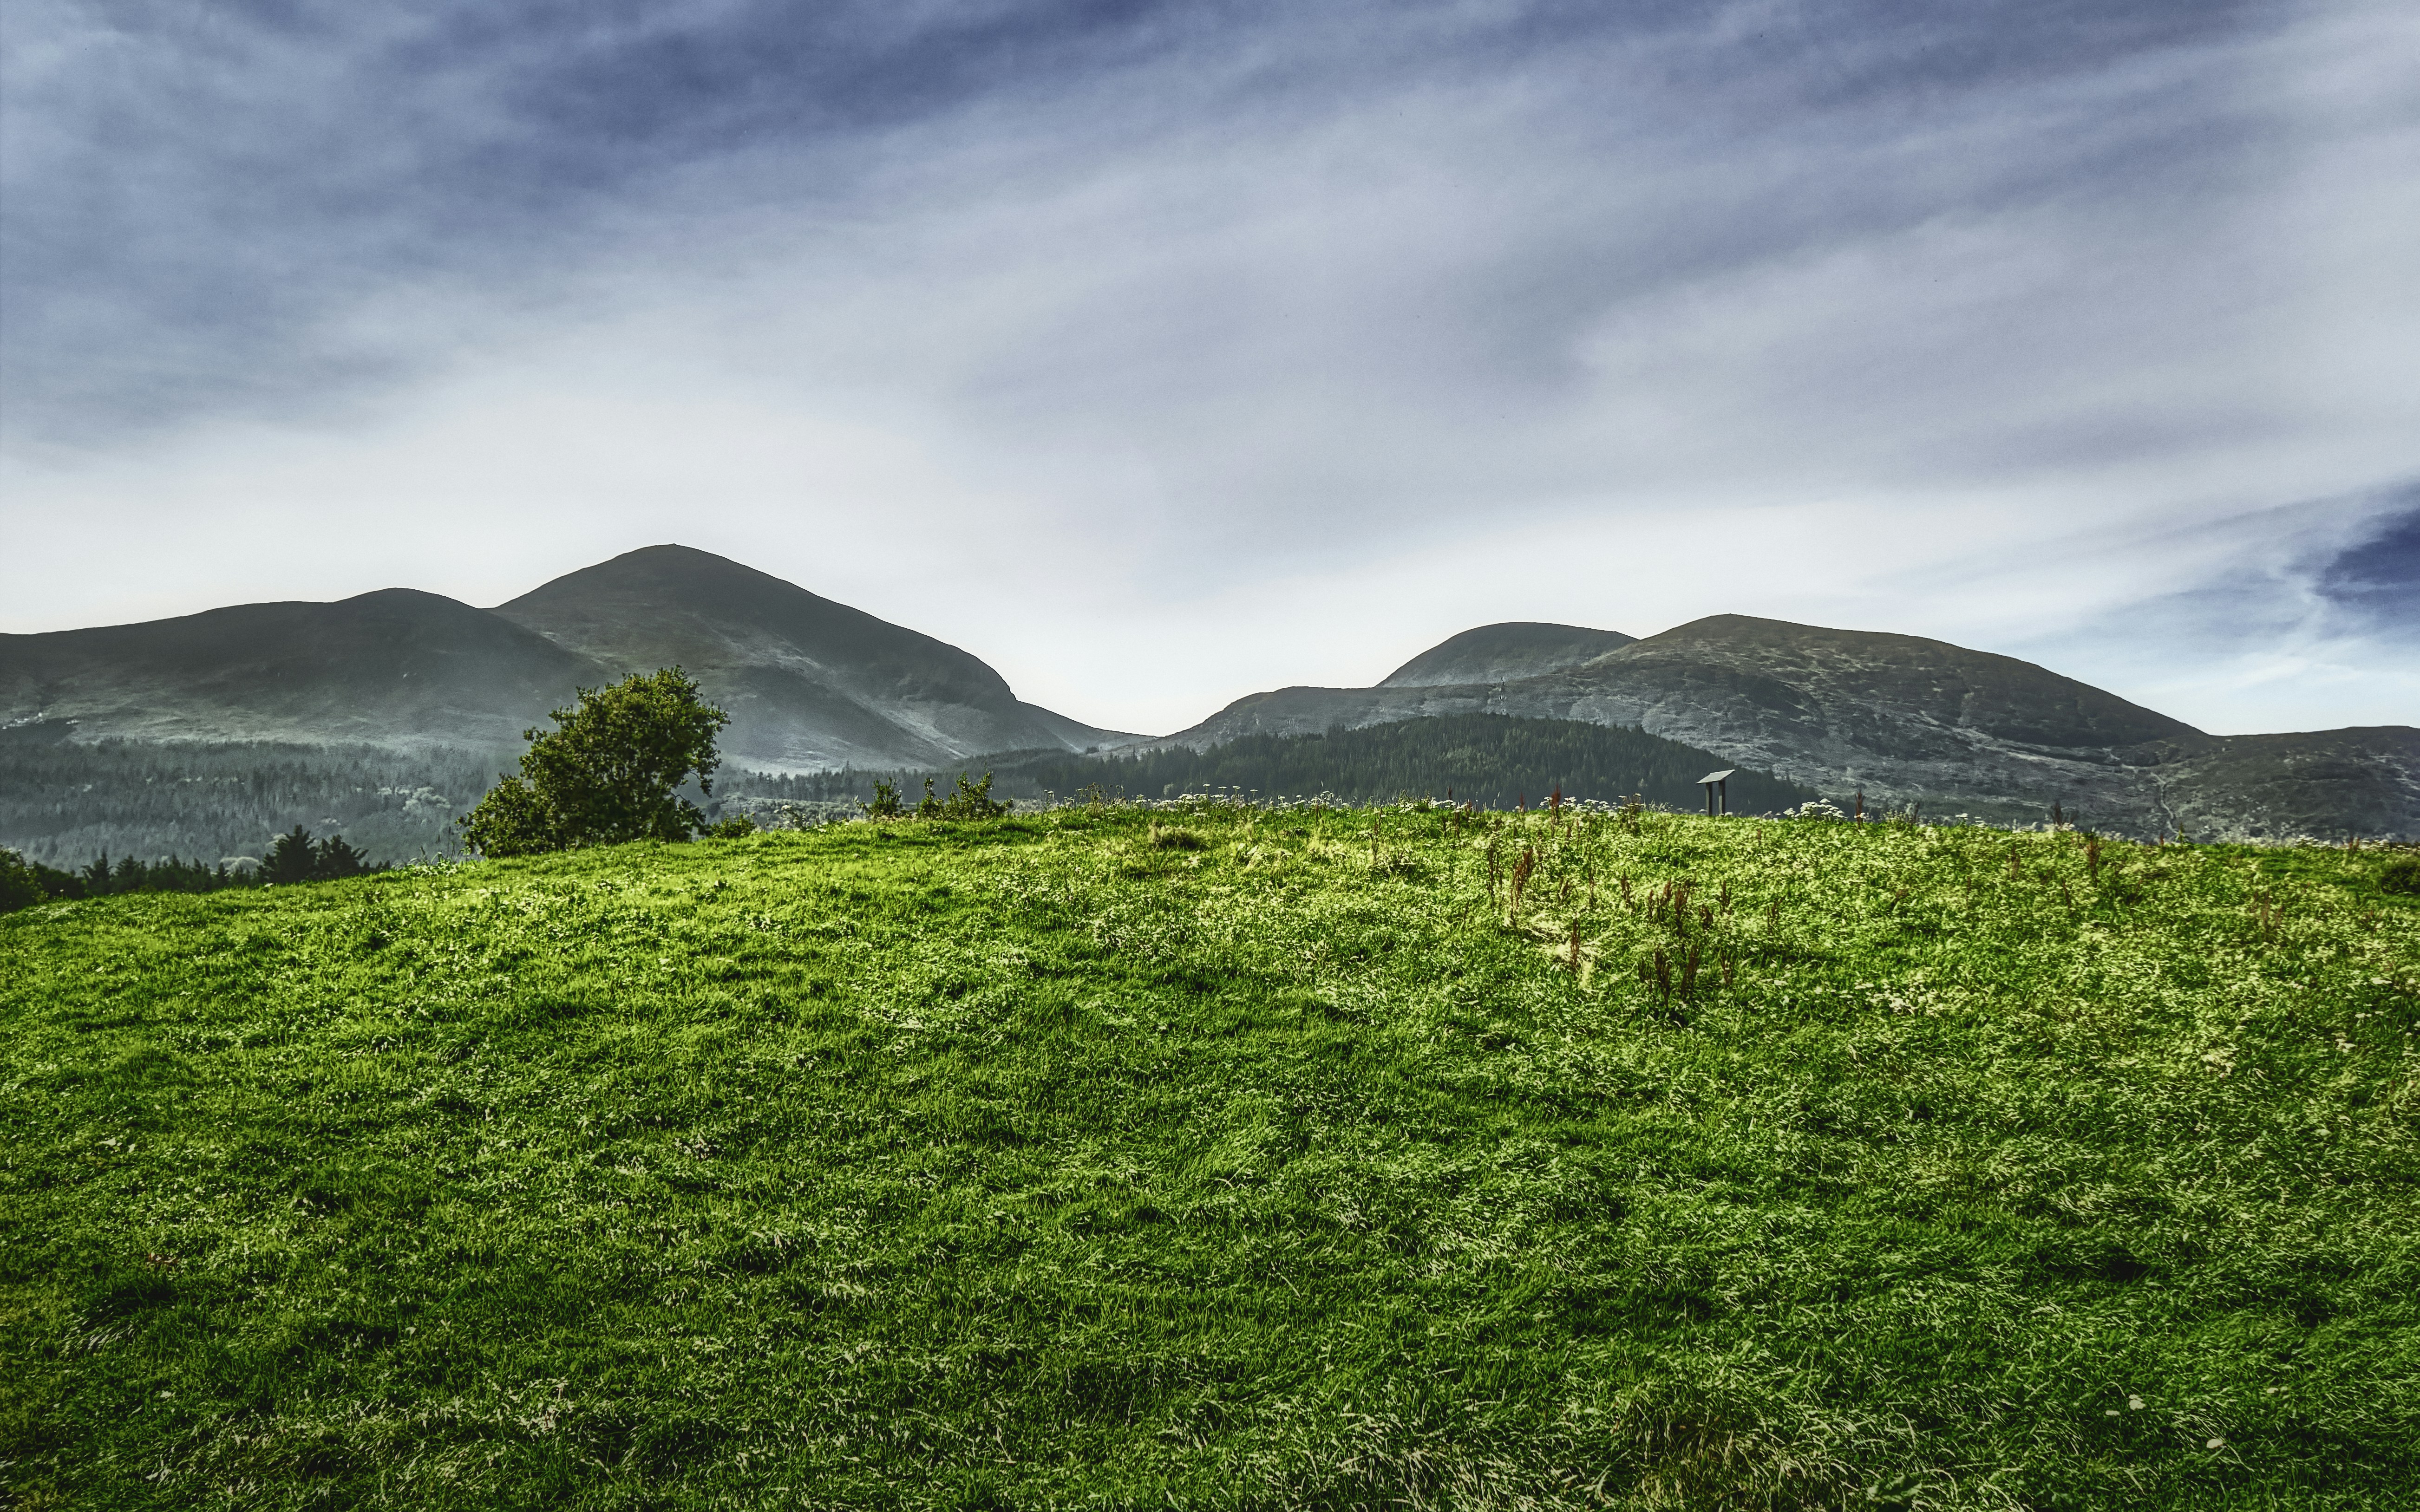 The Mourne Mountains Slieve Donard (right) and Slieve Commedagh (left) meet and form a geological formation known locally as \